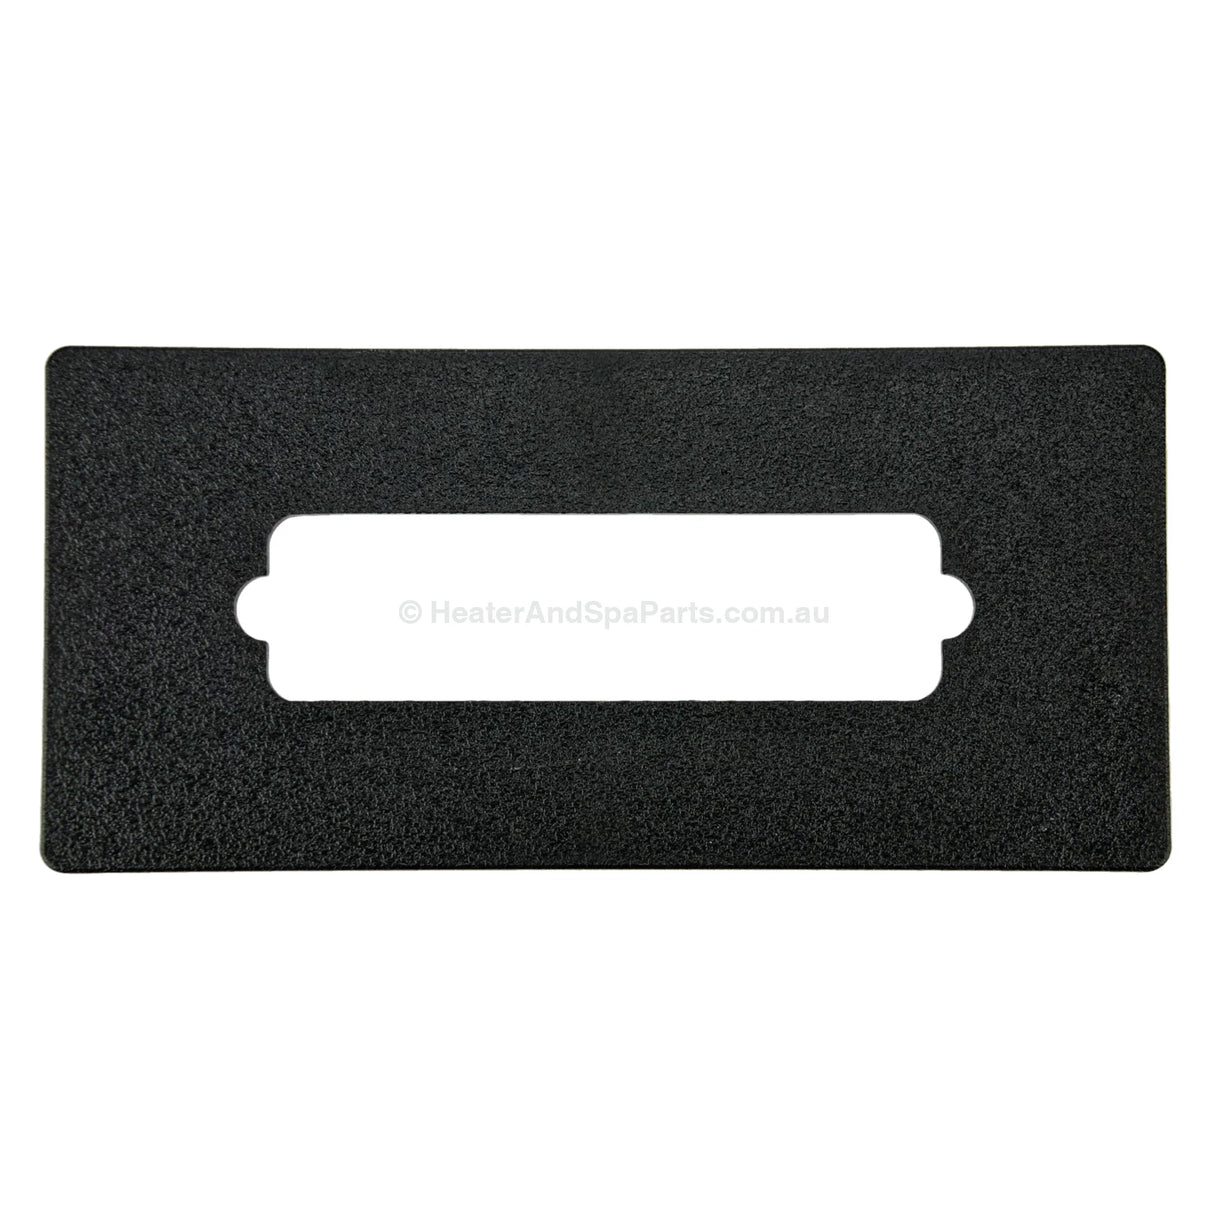 Spa Touchpad Adaptor Plate Facias - Various Sizes 215Mm X 100Mm (Hole Suits In.k300 130Mm 36Mm)